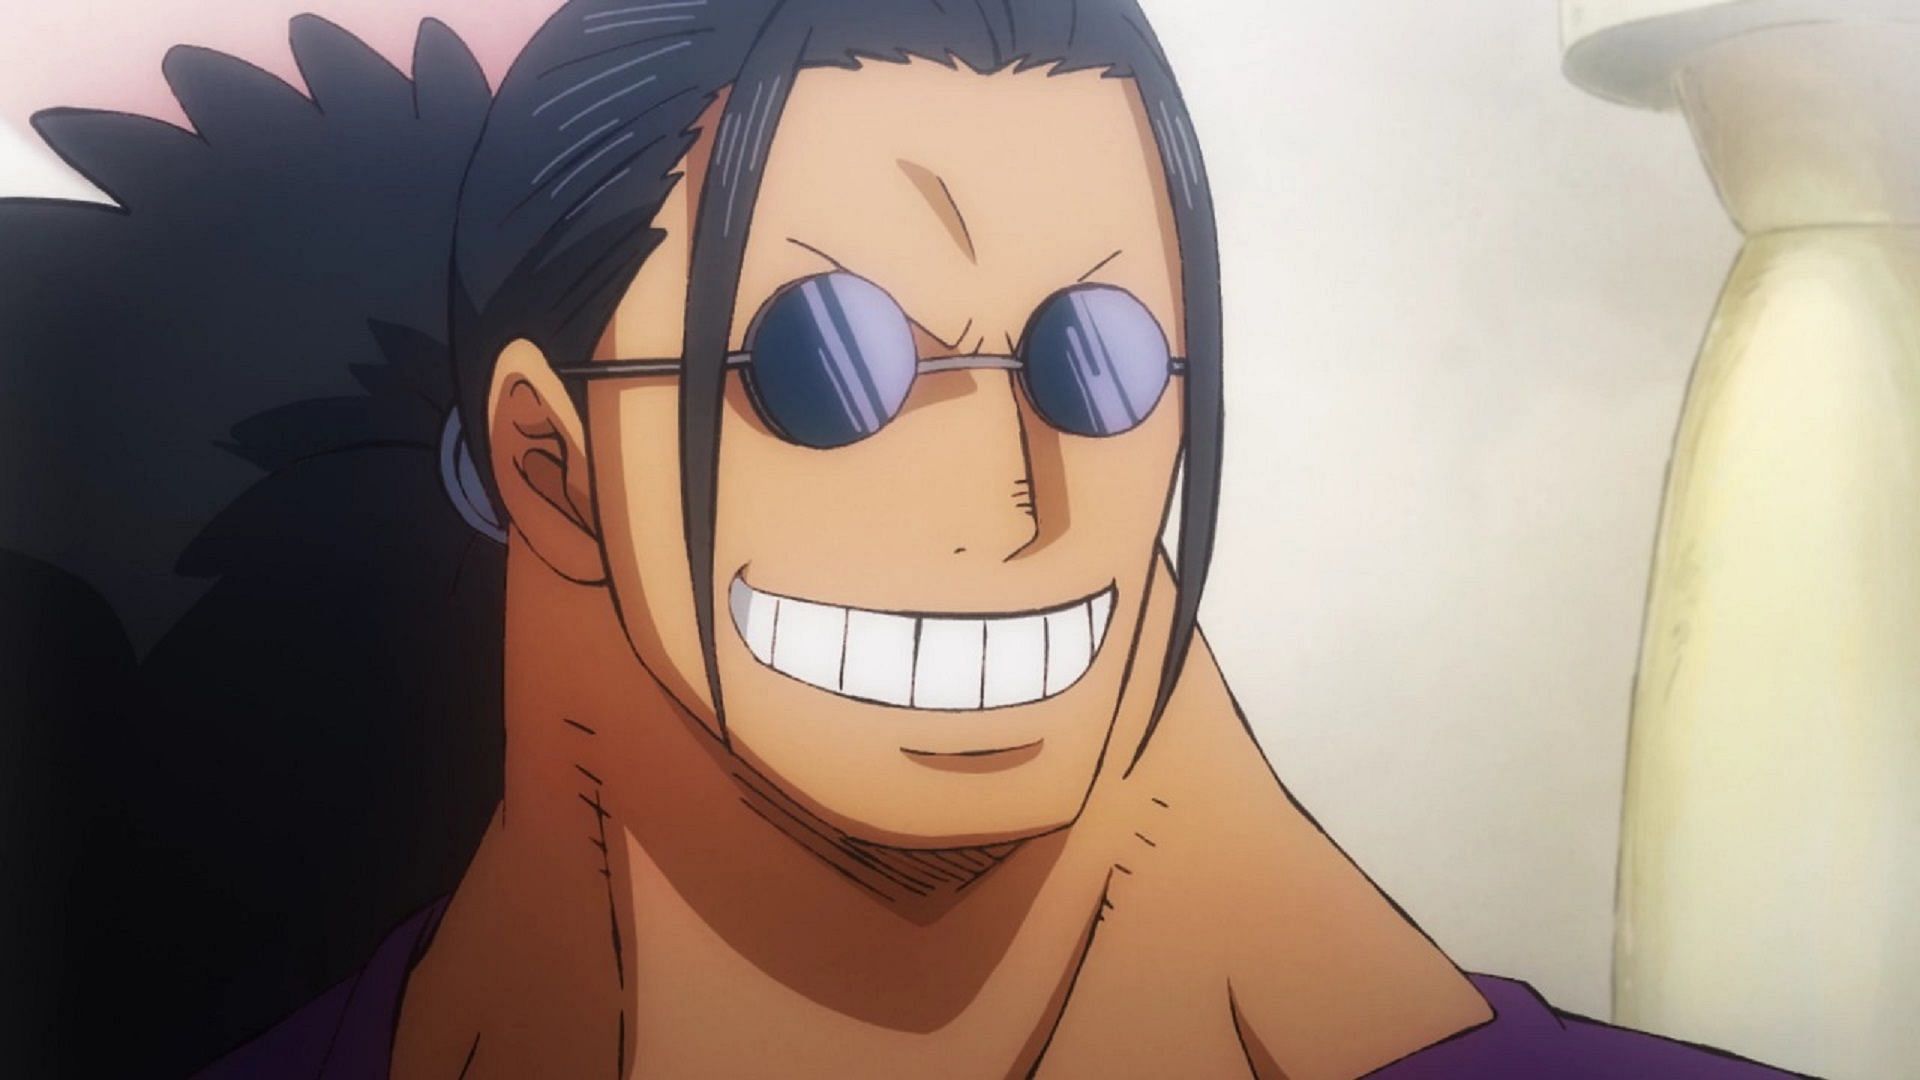 Scopper Gaban as seen during the days of the Roger Pirates (Image via Toei Animation, One Piece)